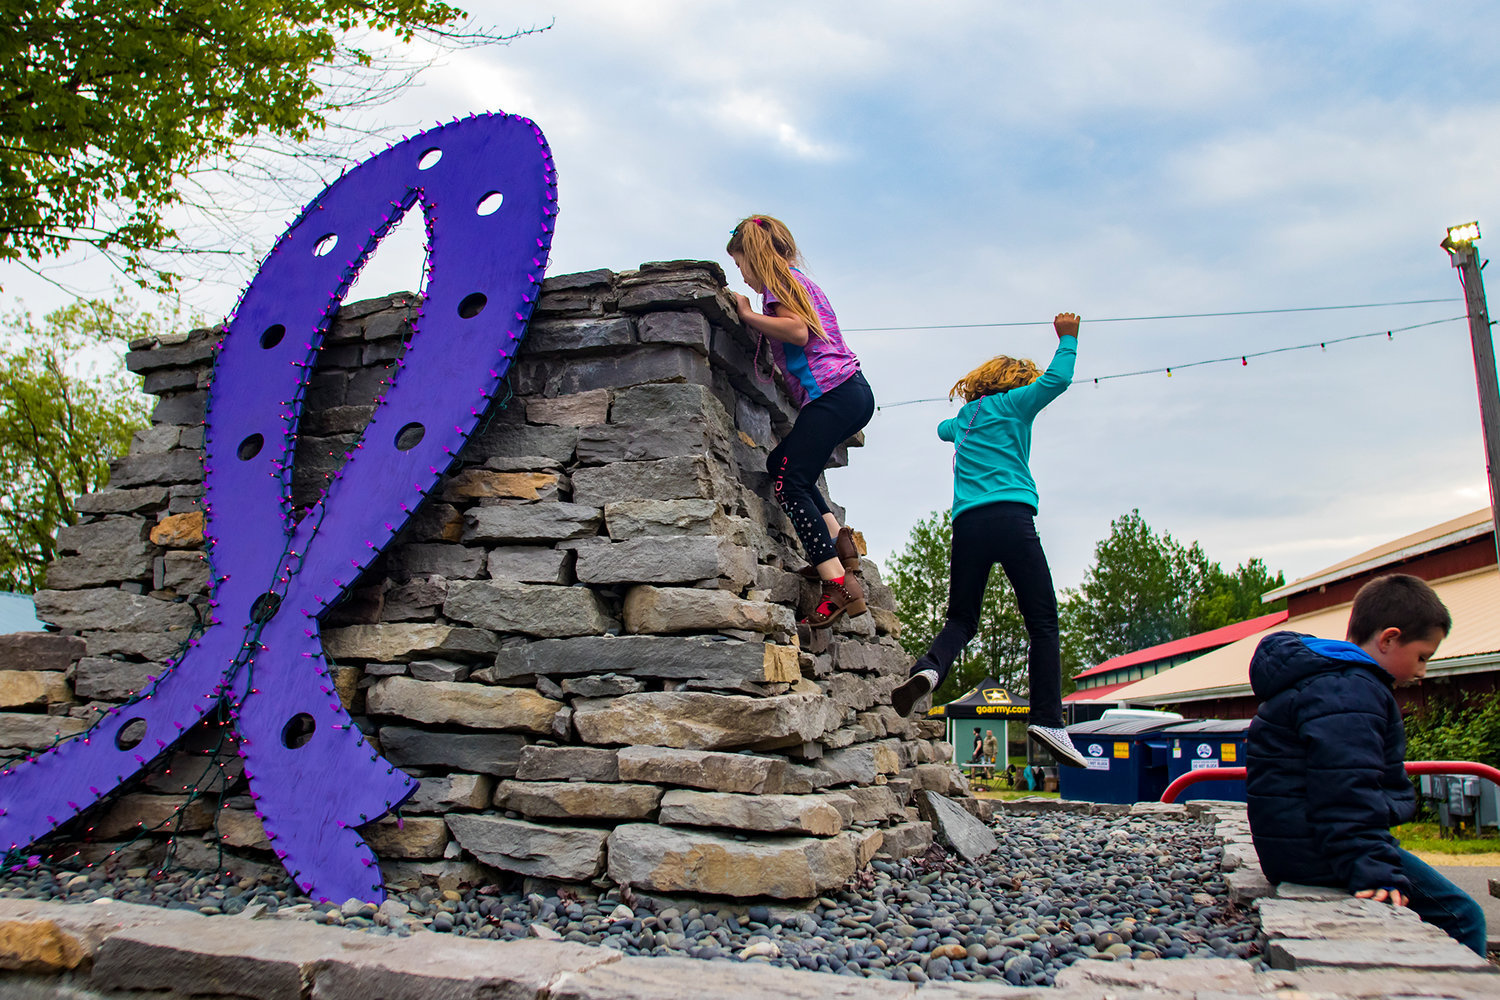 FILE PHOTO — Children climb around a purple ribbon decoration during the Relay For Life at the Southwest Washington Fairgrounds.